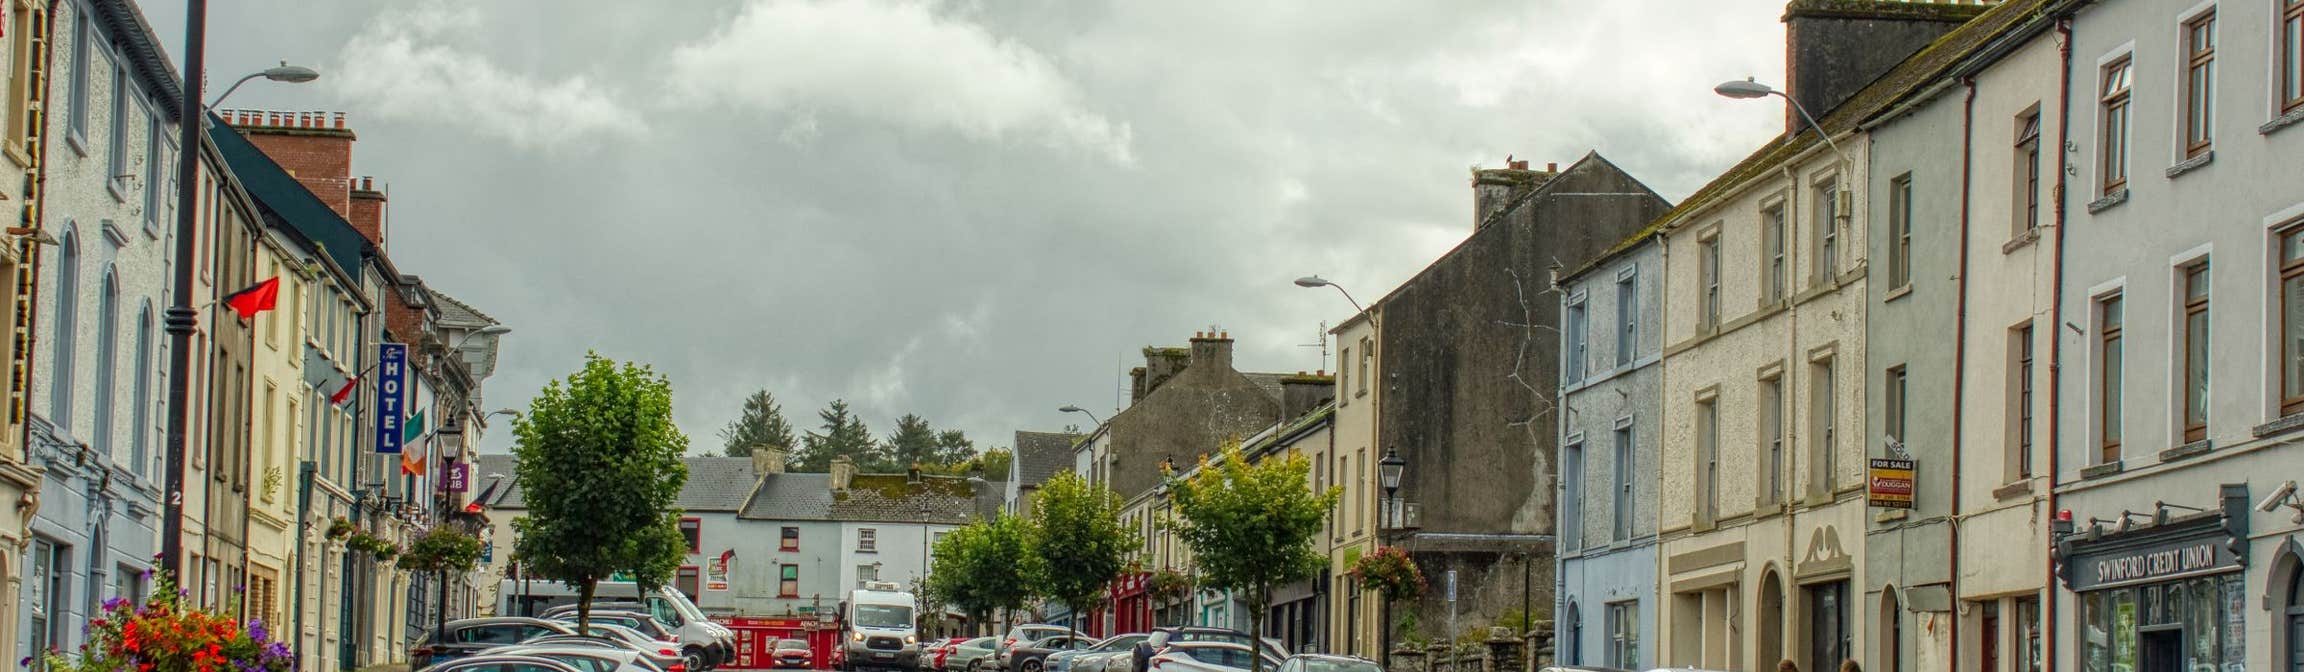 Image of Swinford in County Mayo